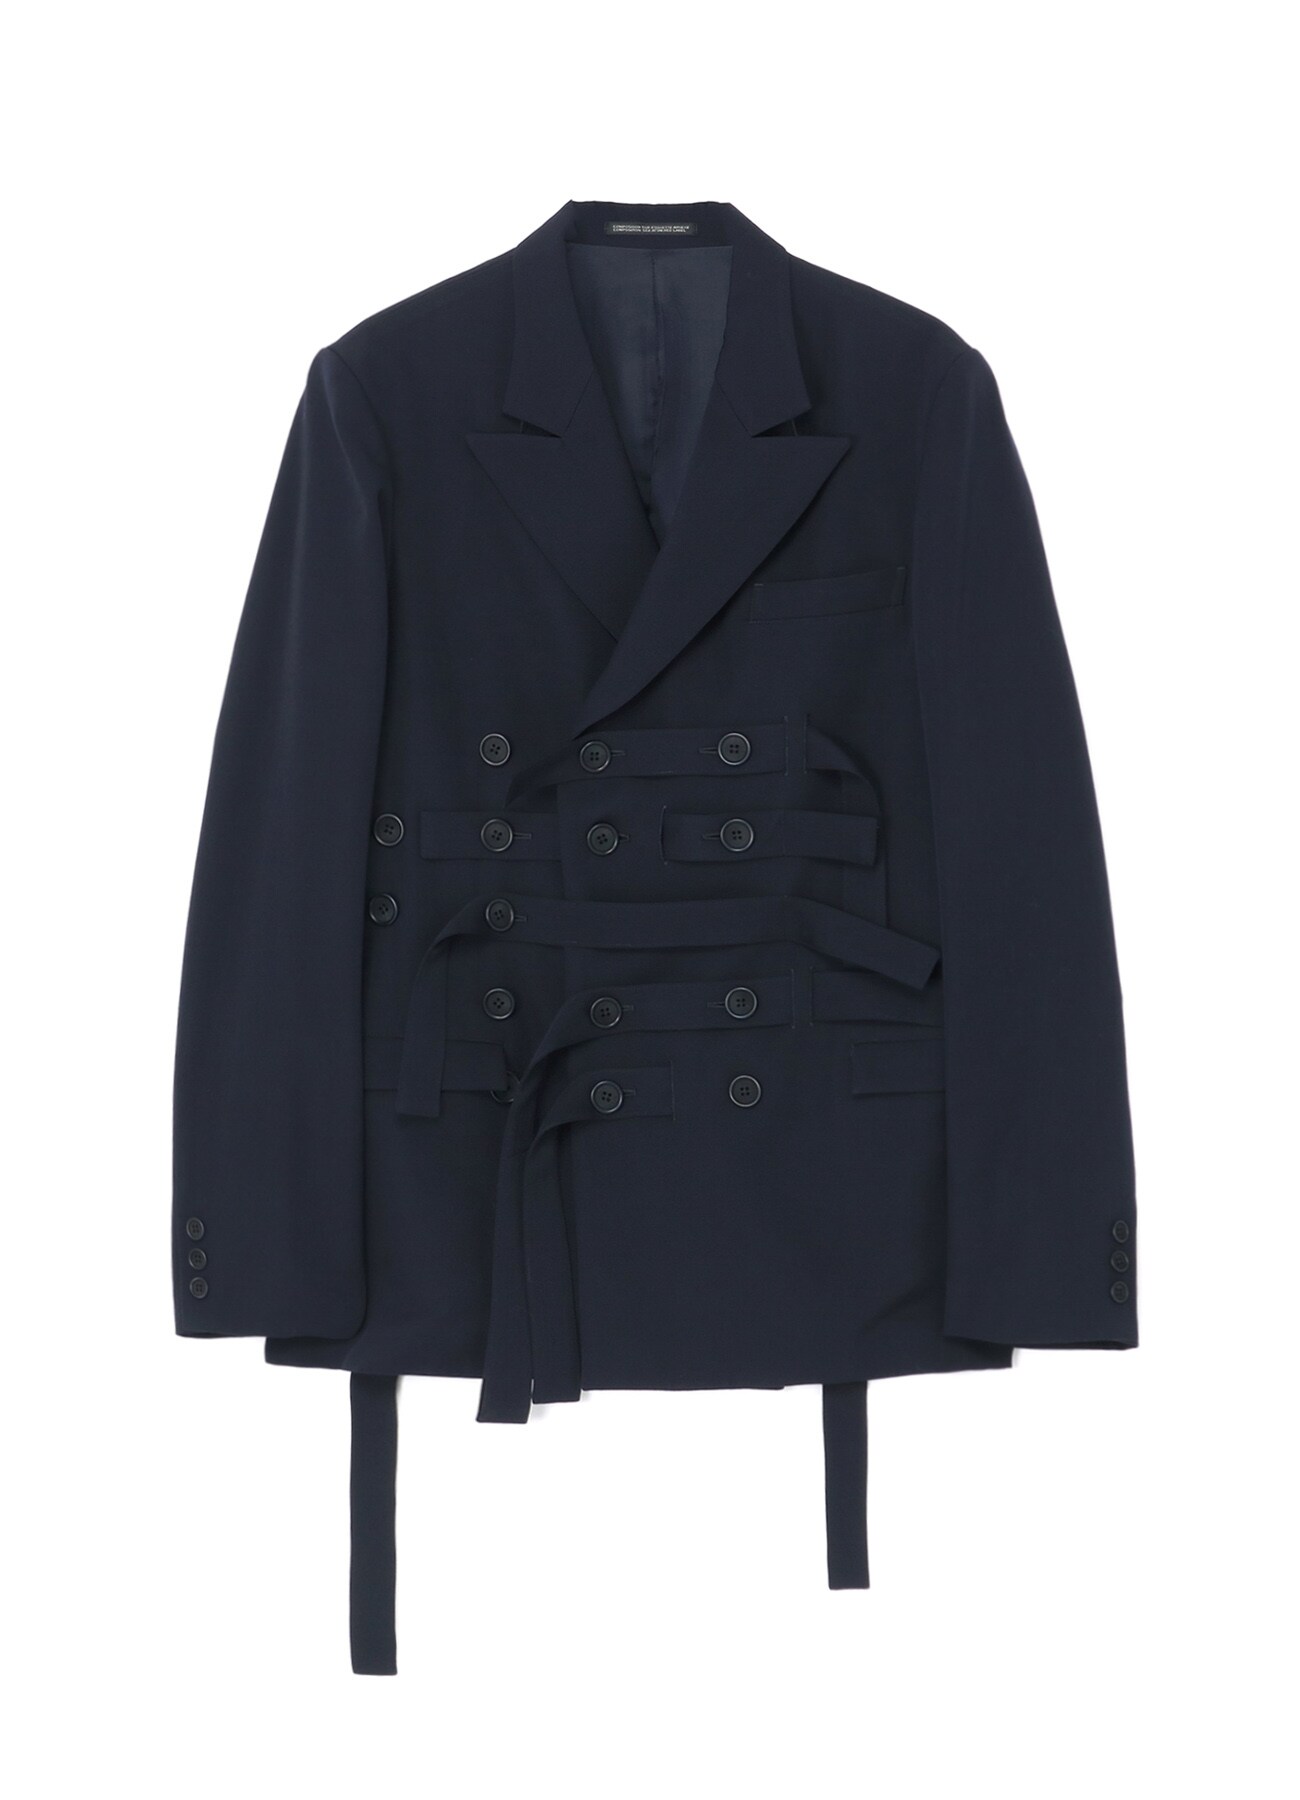 NAVY DOUBLE BREASTED JACKET WITH 5-BELTS